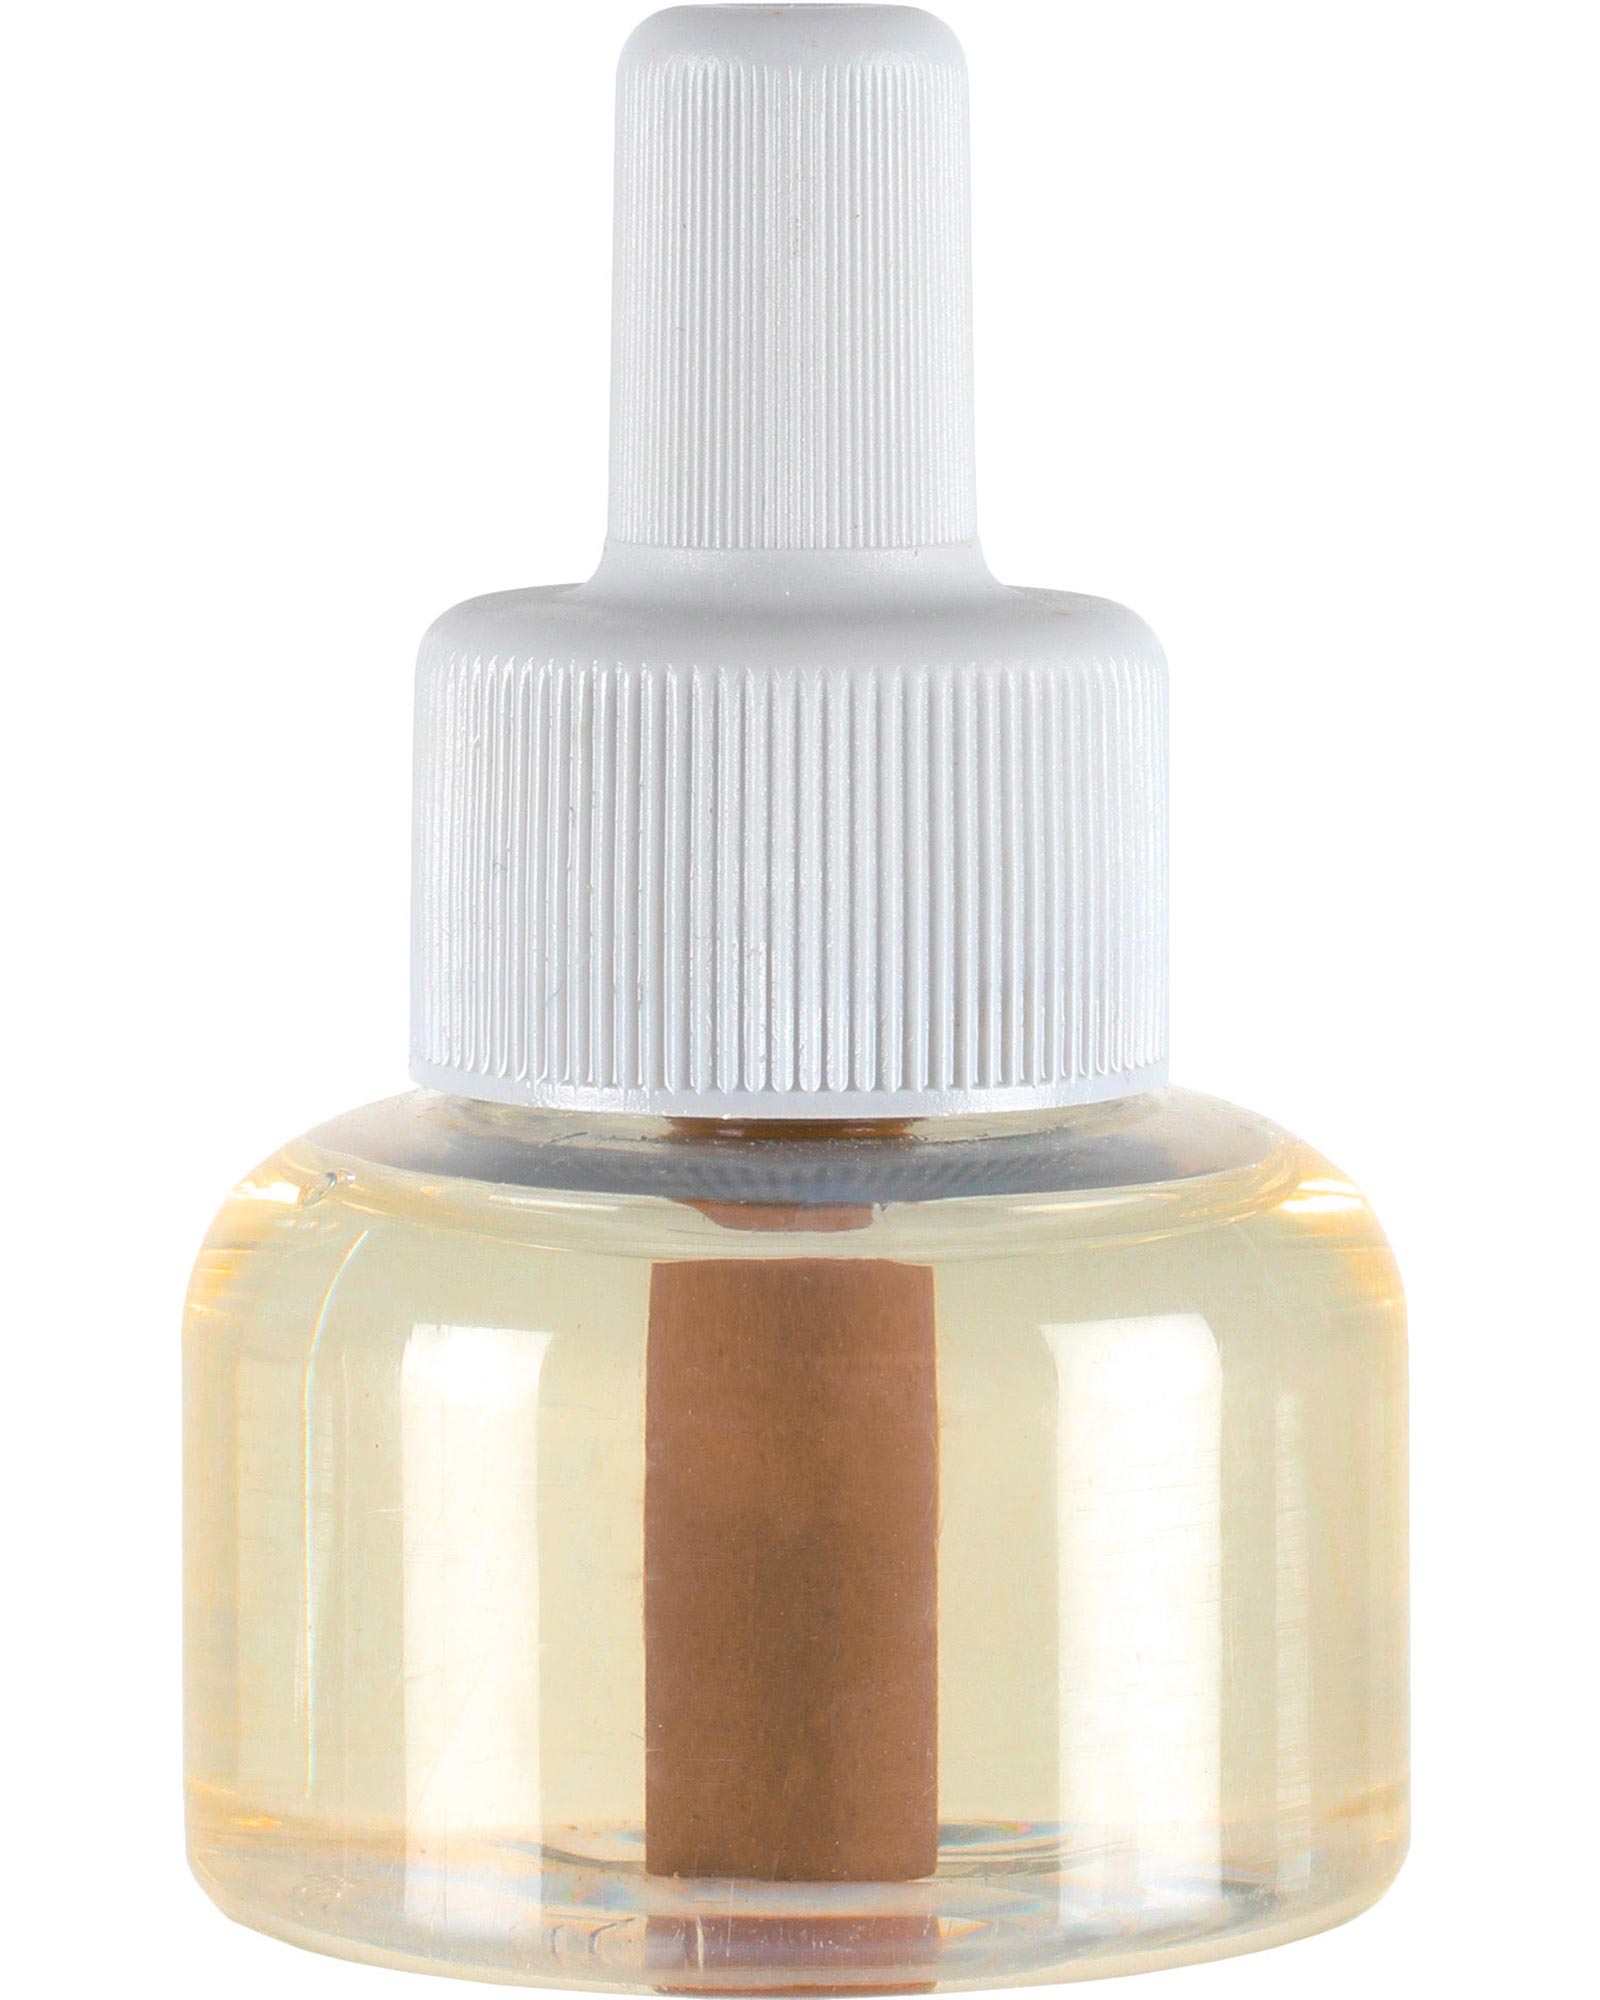 Product image of Lifesystems Mosquito Killer Refill Liquid - 35ml